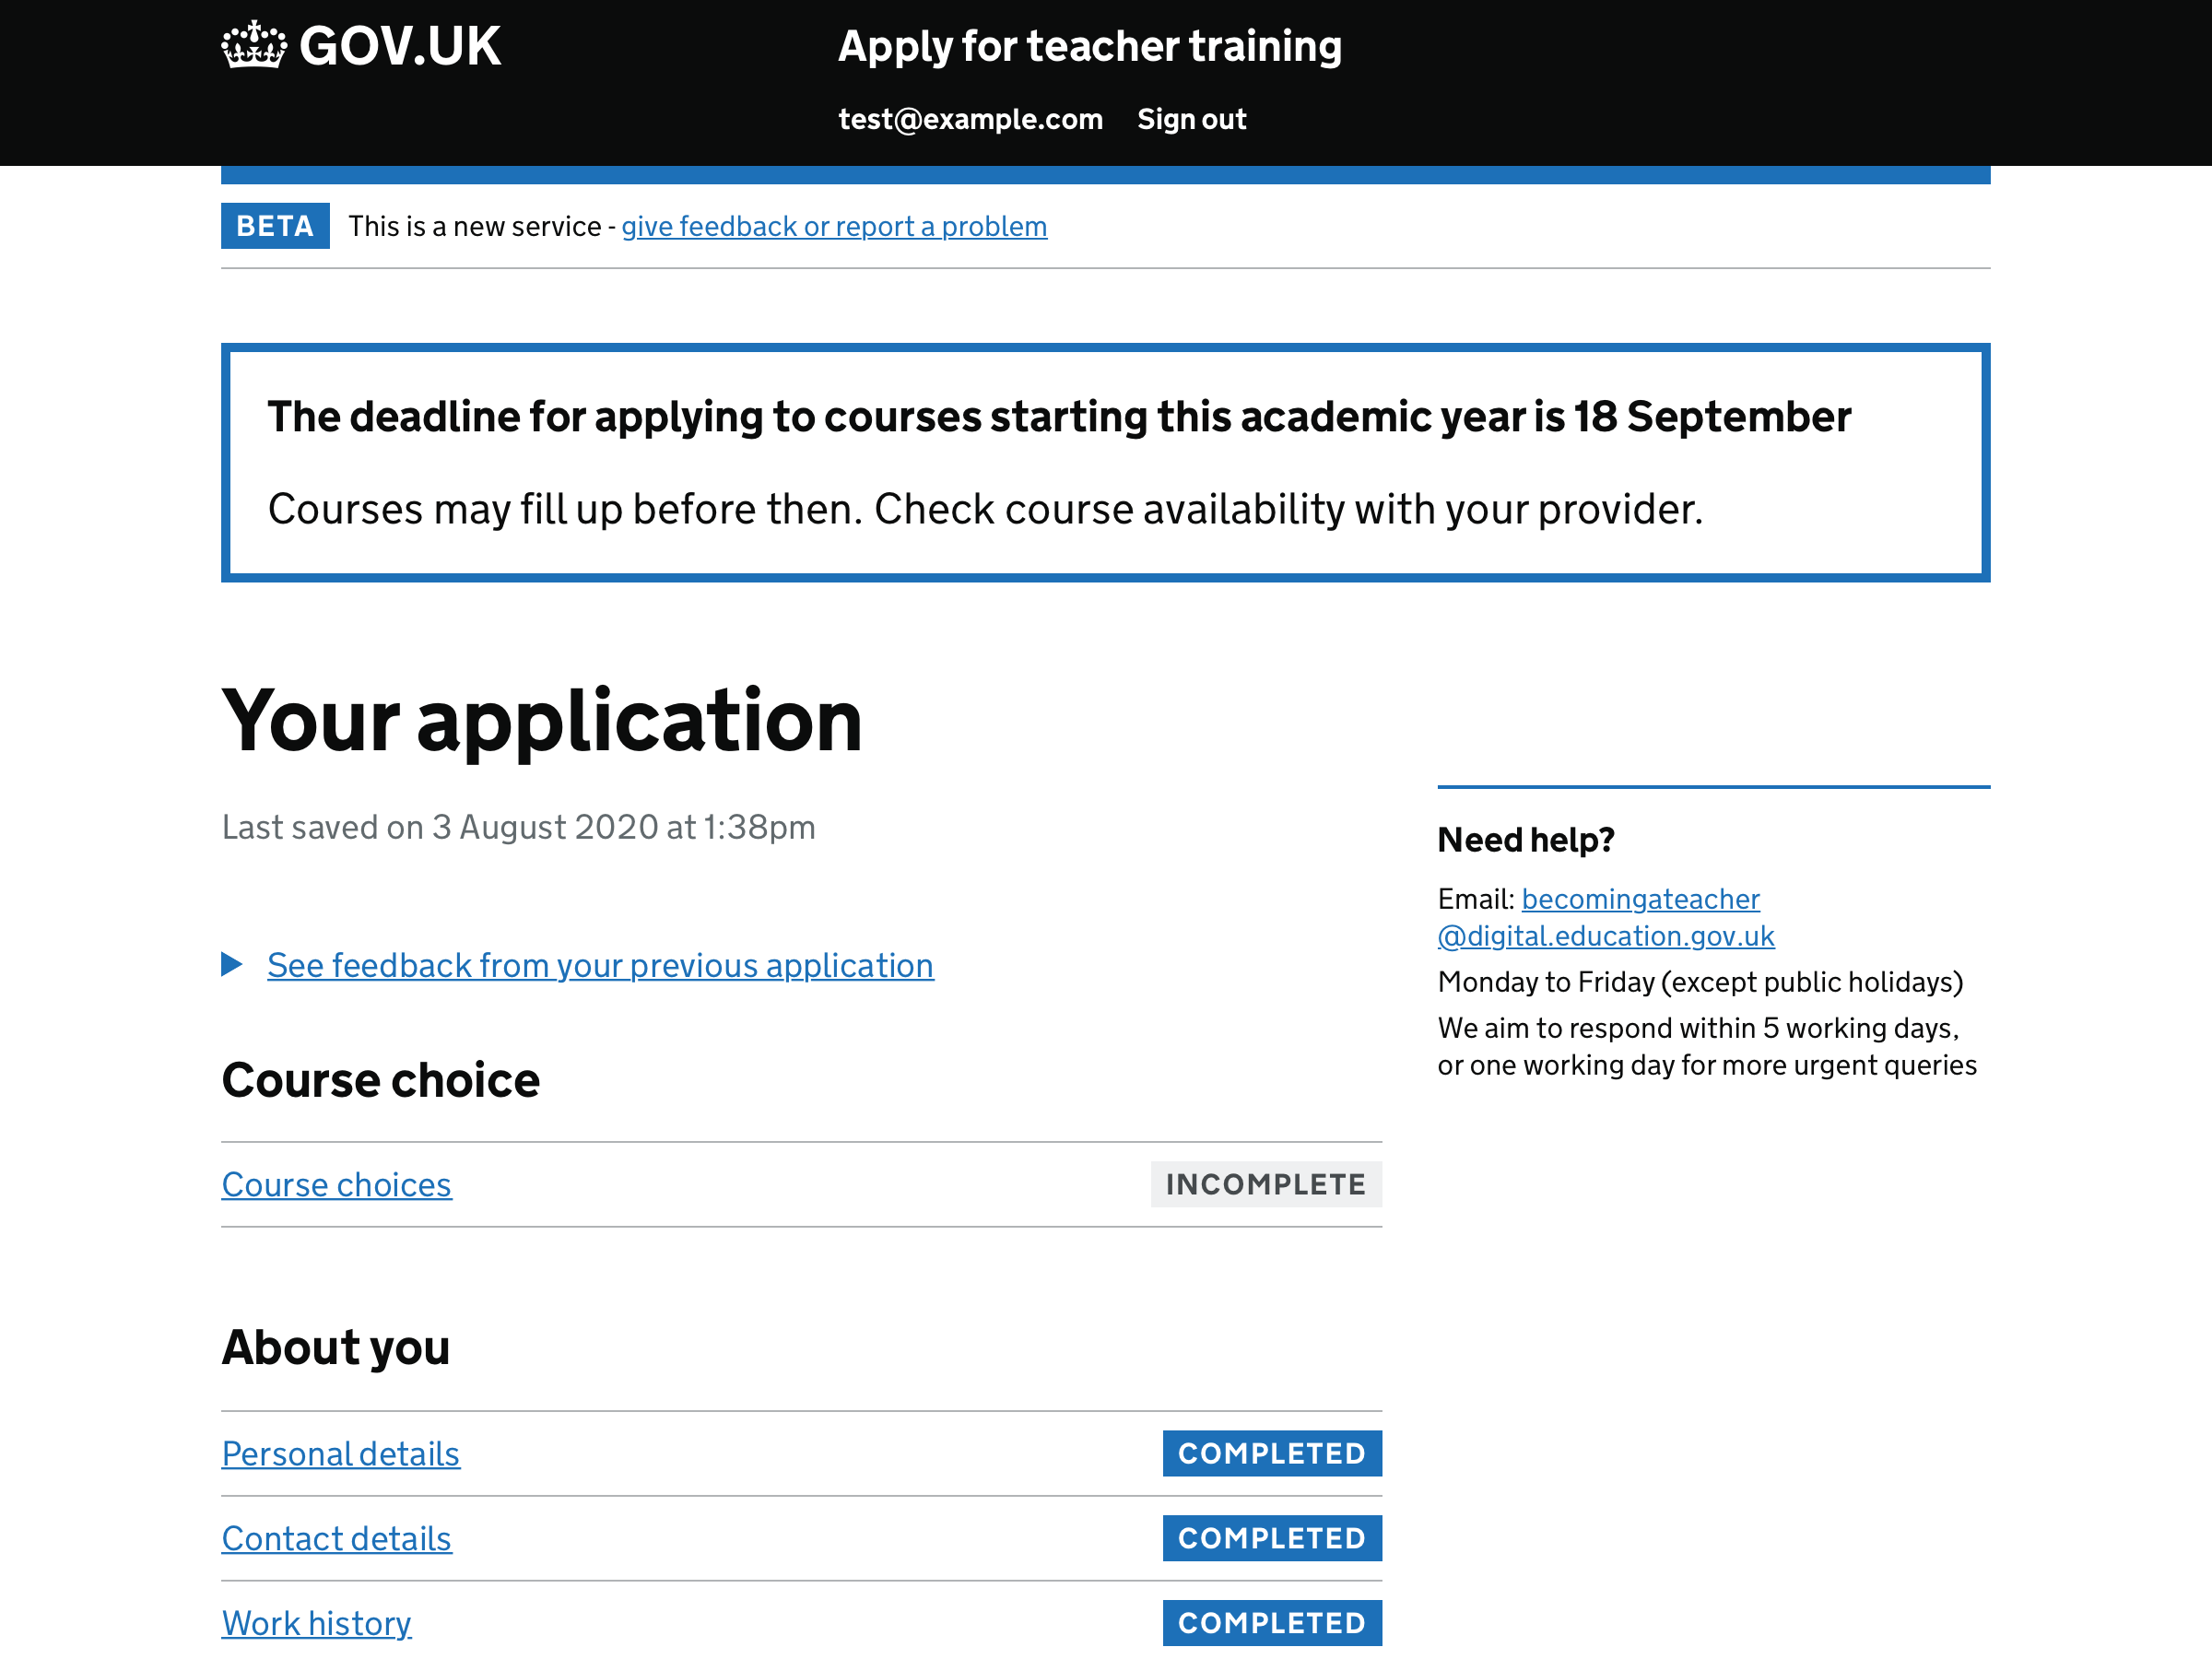 Screenshot of a banner informing candidates of the upcoming deadline for applying again.